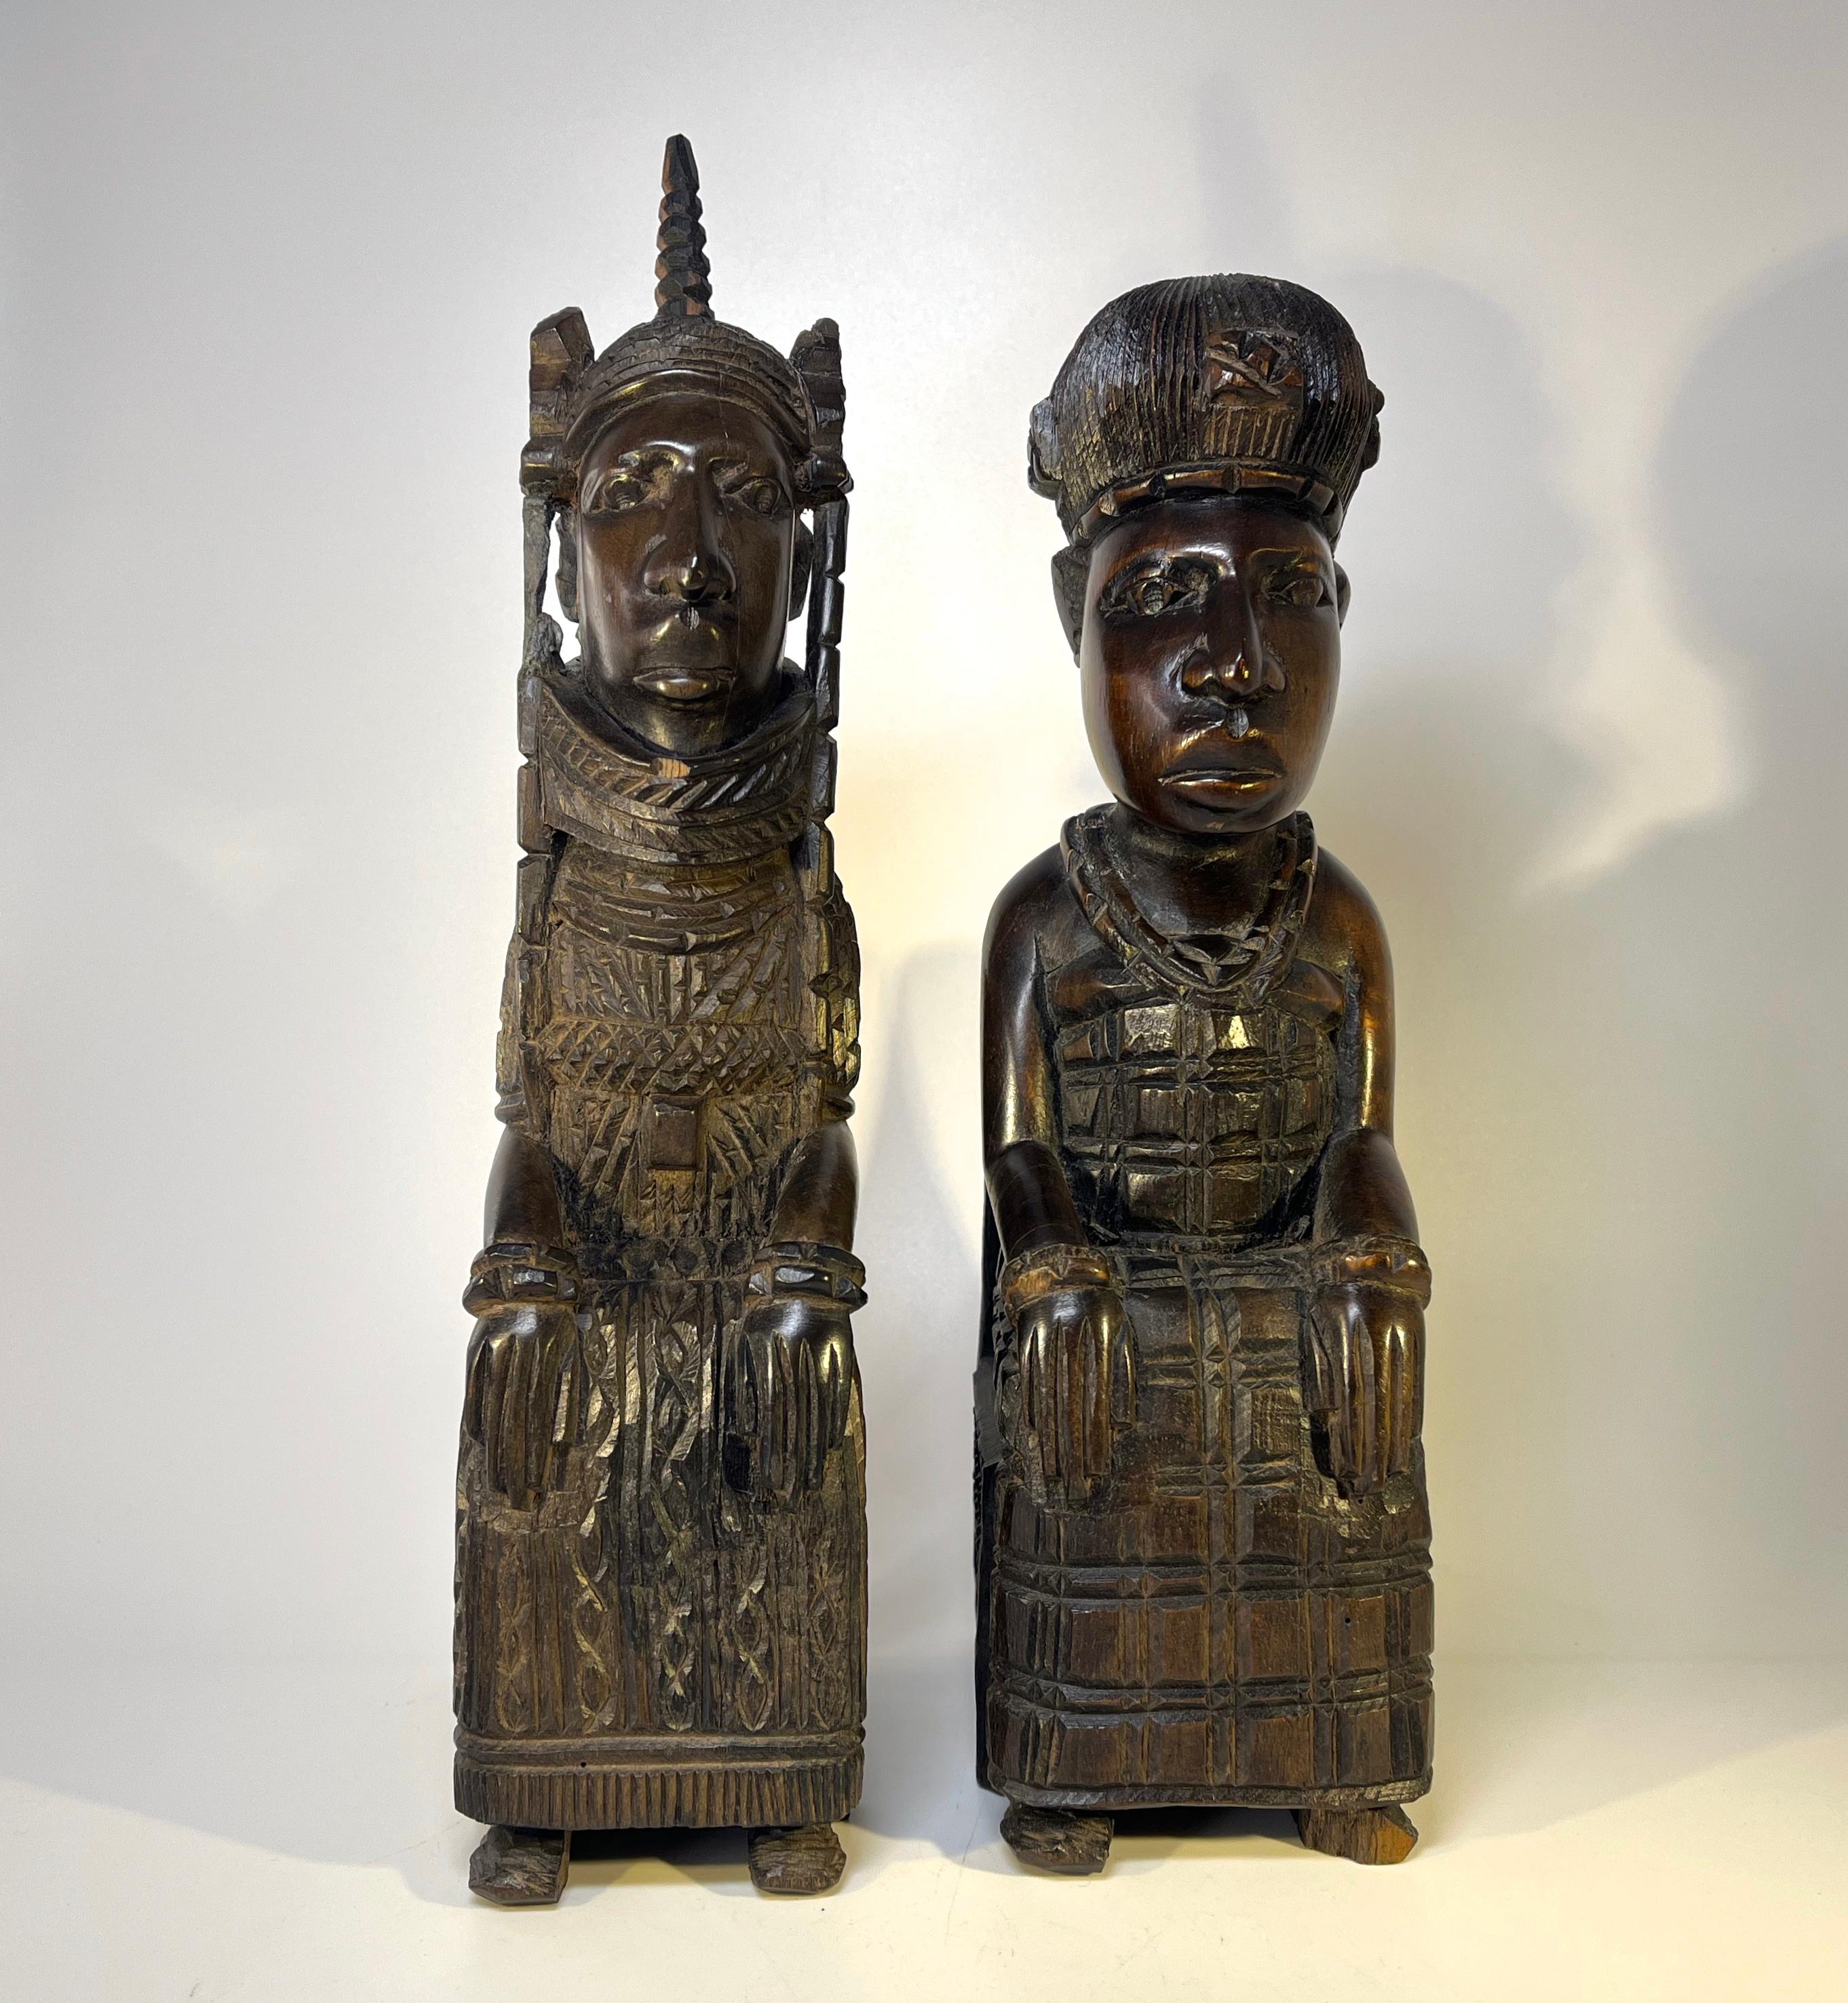 Charming Benin King Oba and his Queen. Terrific pair of Benin hand carved ebony hardwood figures.
Intricate detailing on each of these super West African carvings 
Circa Mid 20th century
King Height 11.75 inch, Width 2.5 inch, Depth 4 inch
Queen